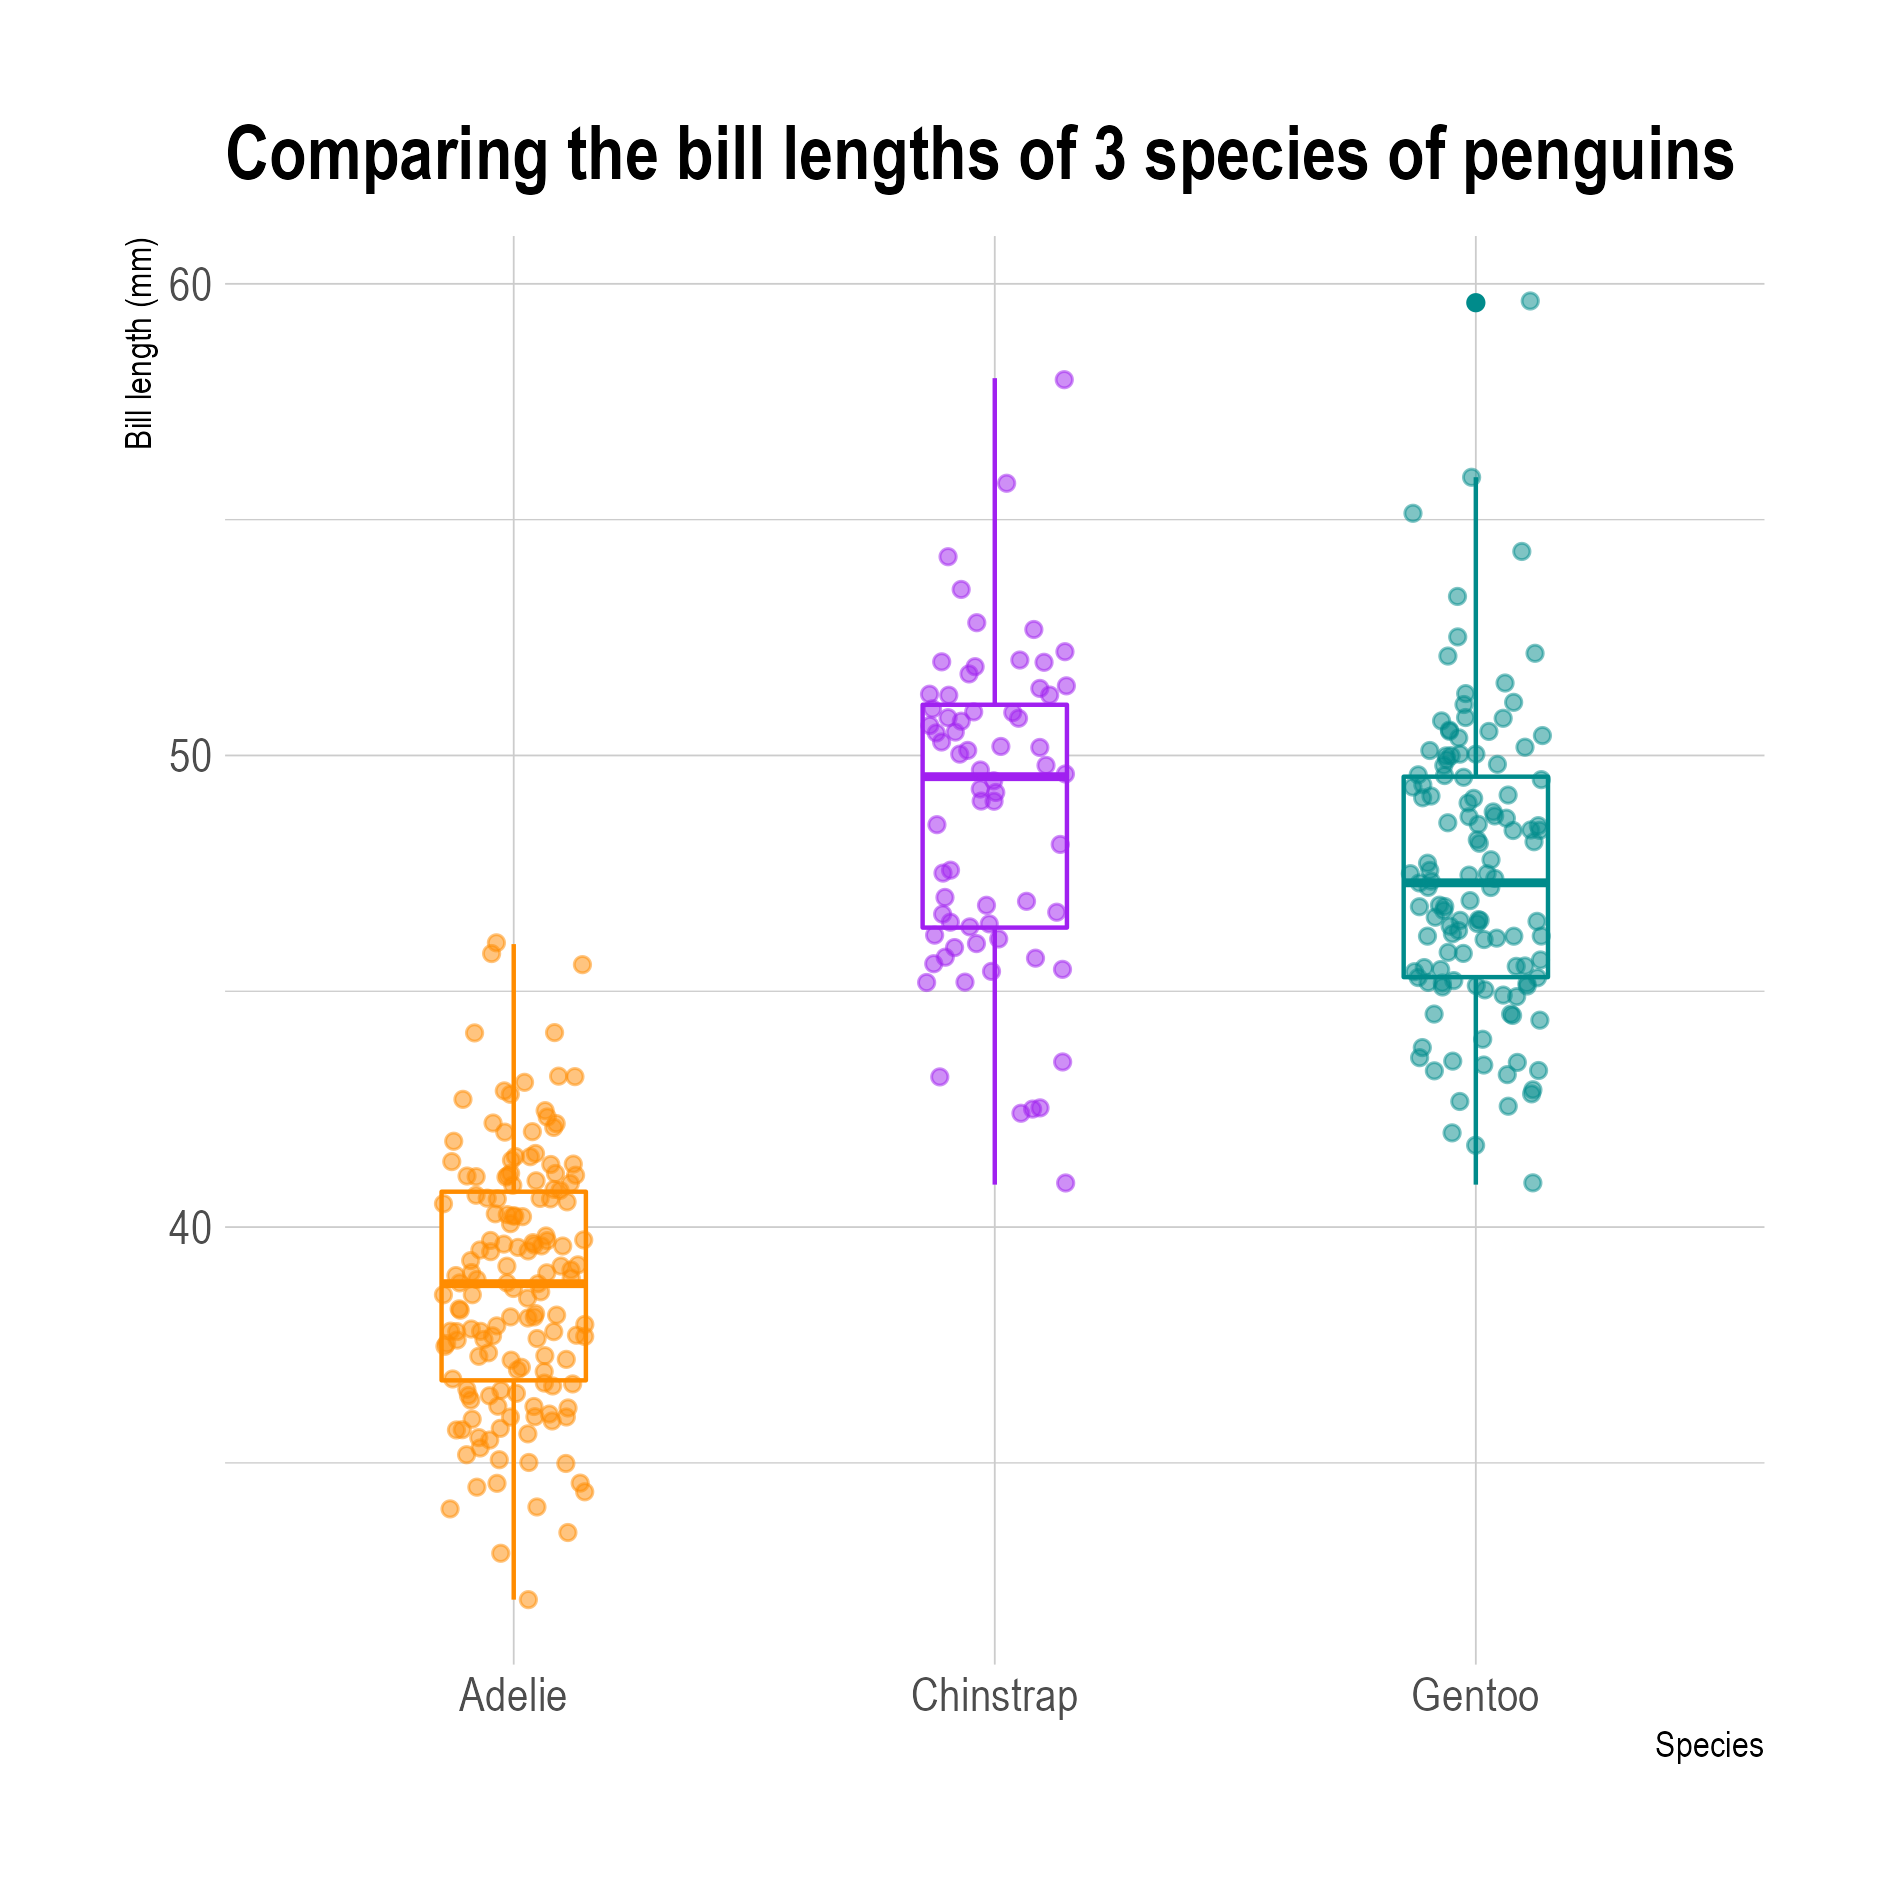 3 box plots comparing the bill lengths of 3 species of penguins. The individual data points are plotted on top of the box plots